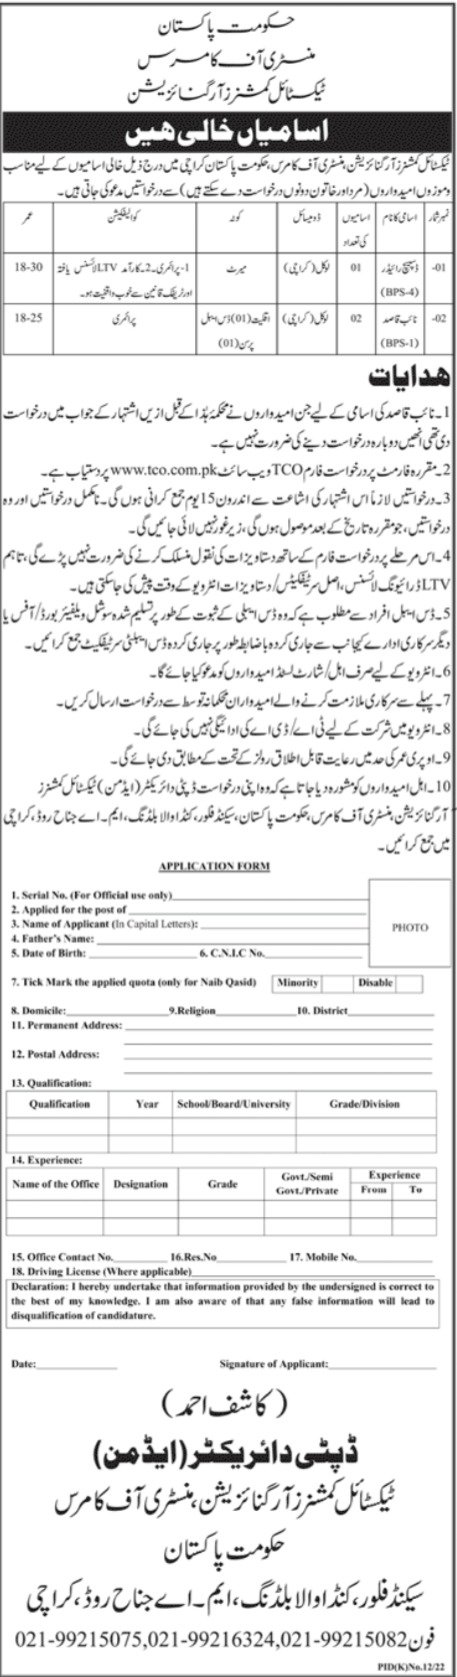 New Govt Vacancies 2022 Pakistan At Ministry of Commerce